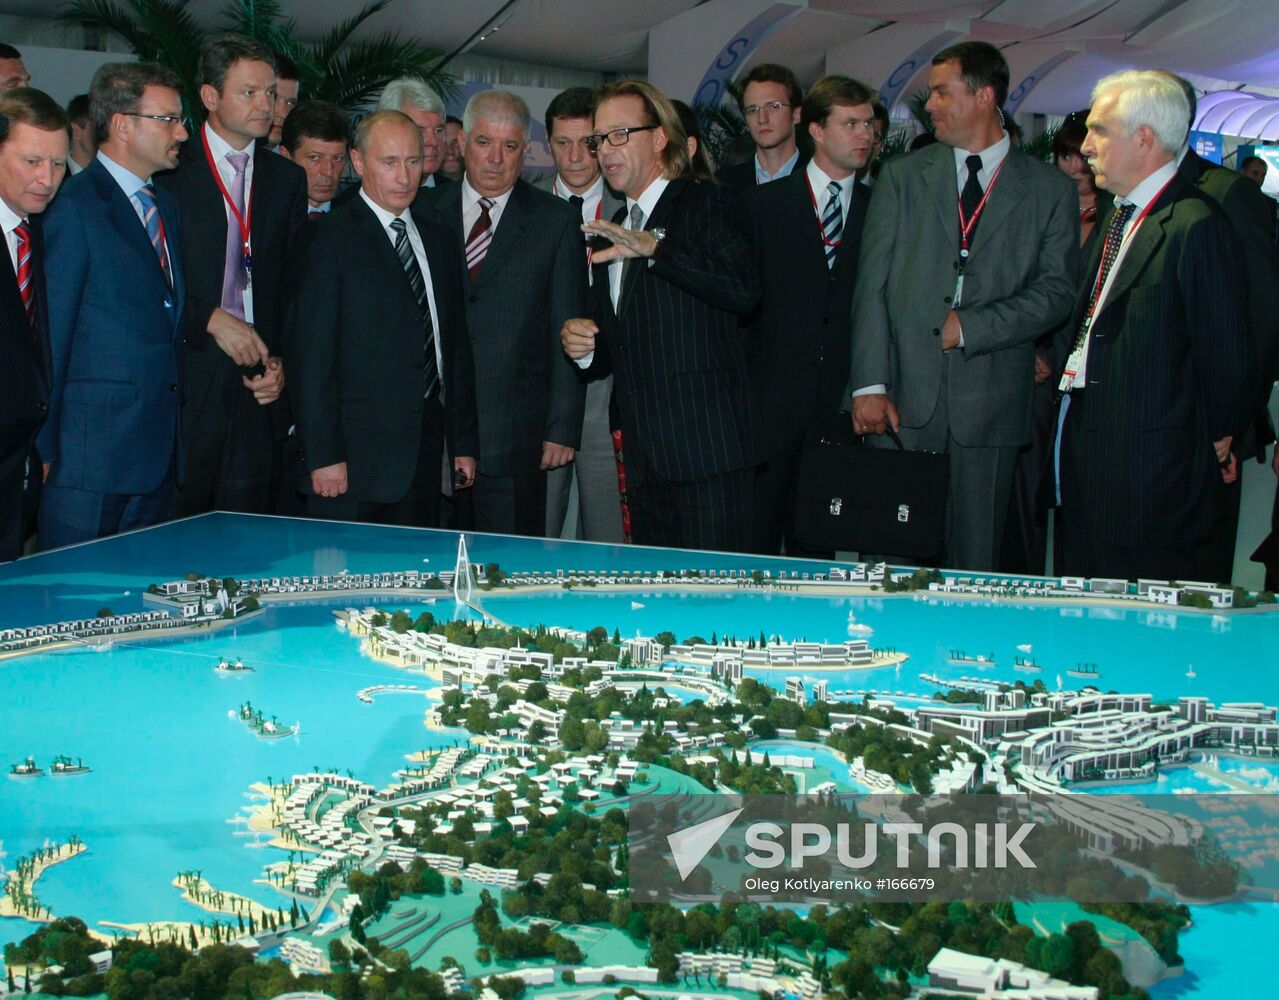 SOCHI FORUM OLYMPIC PROJECTS MODELS